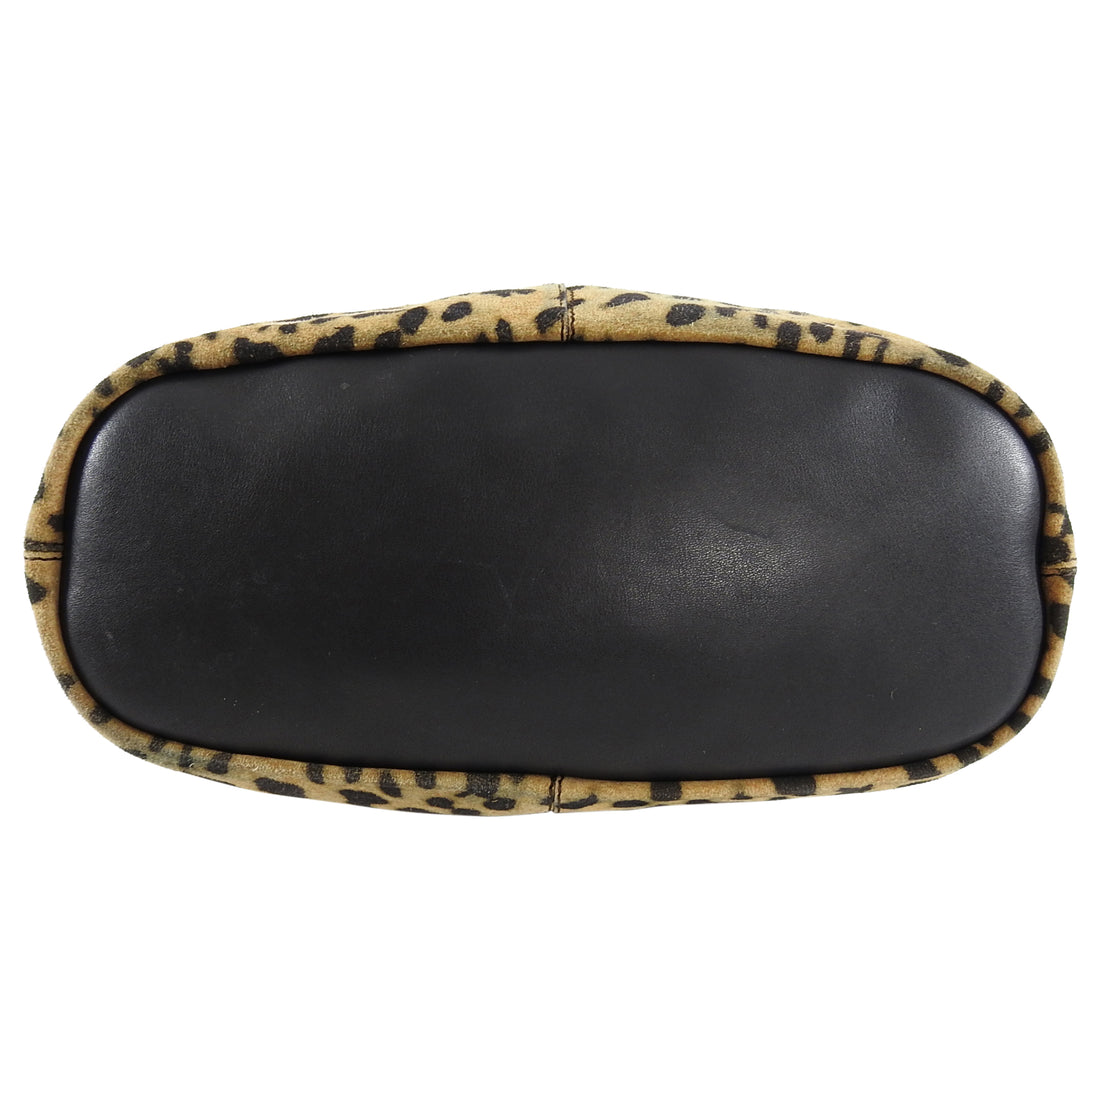 Givenchy Nightingale Leopard Suede Bag